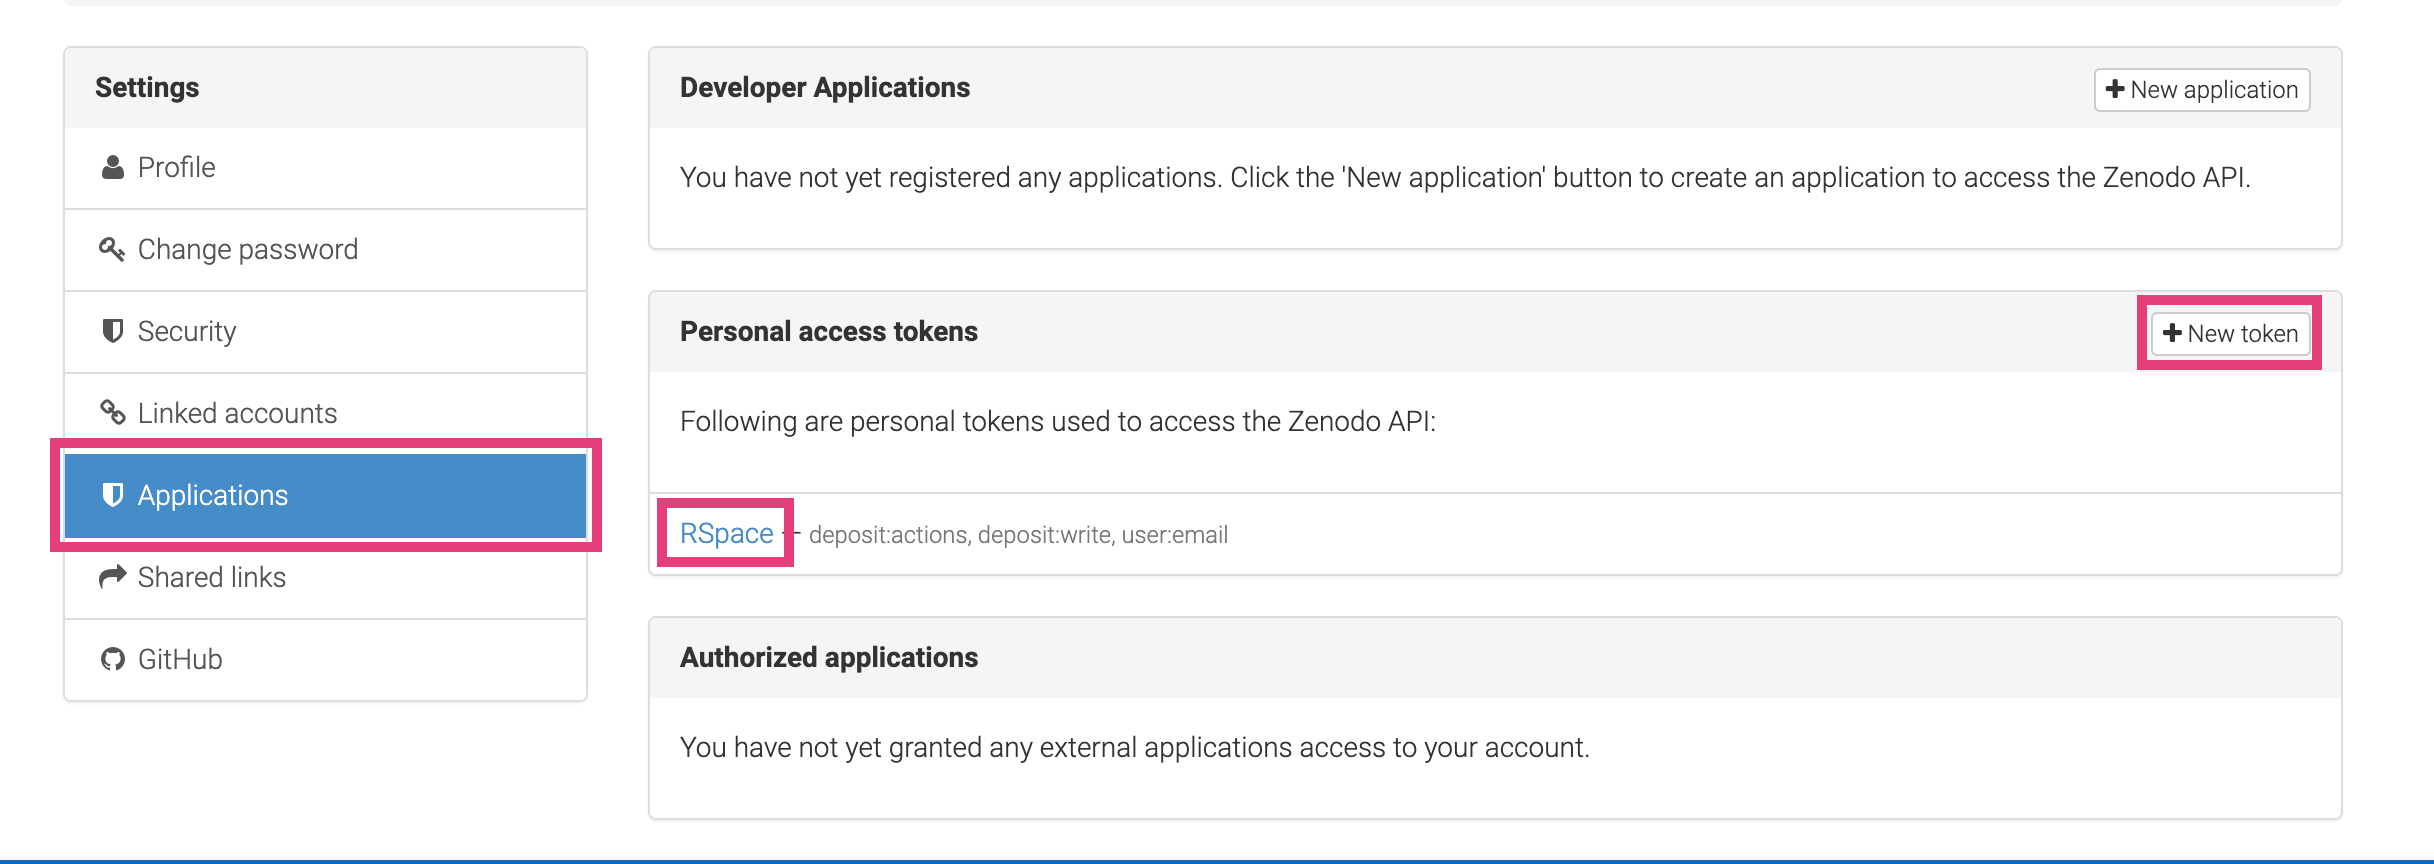 Partial screenshot of the Zenodo settings page. Applications tab, "New token" button, and "RSpace" personal access token are all highlighted